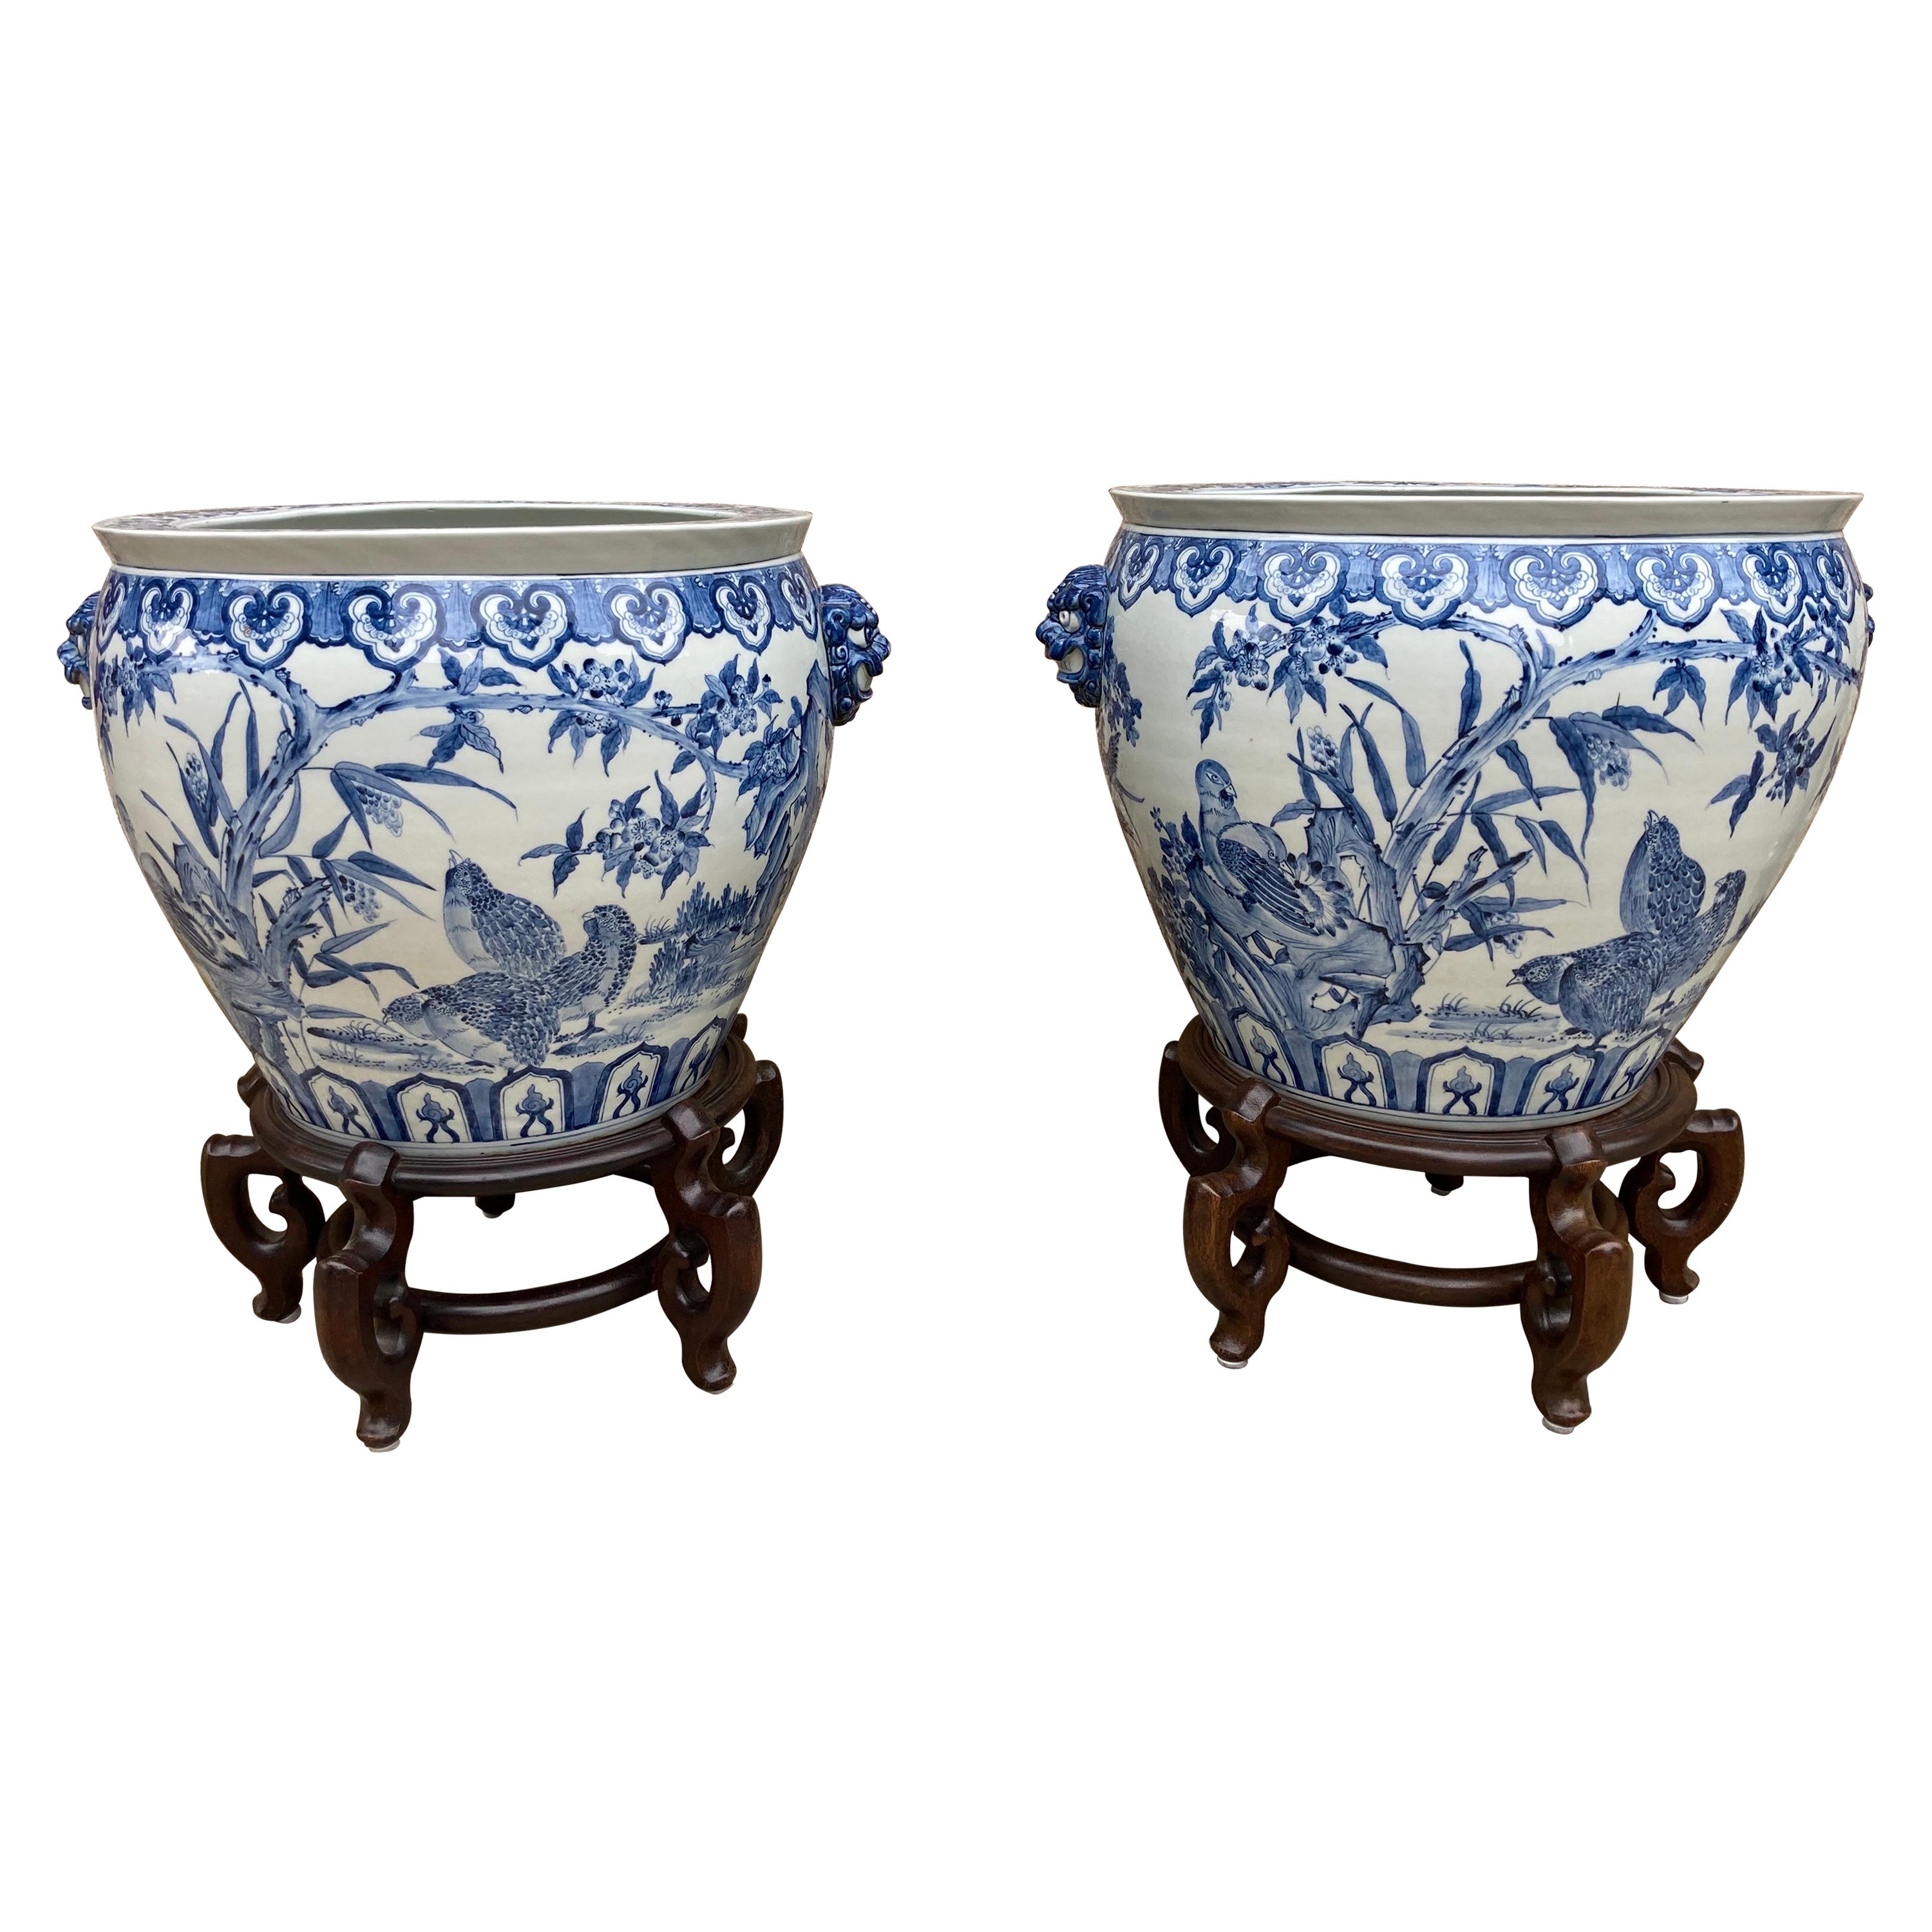 Pair of Large Chinese Blue and White Planters on Stands